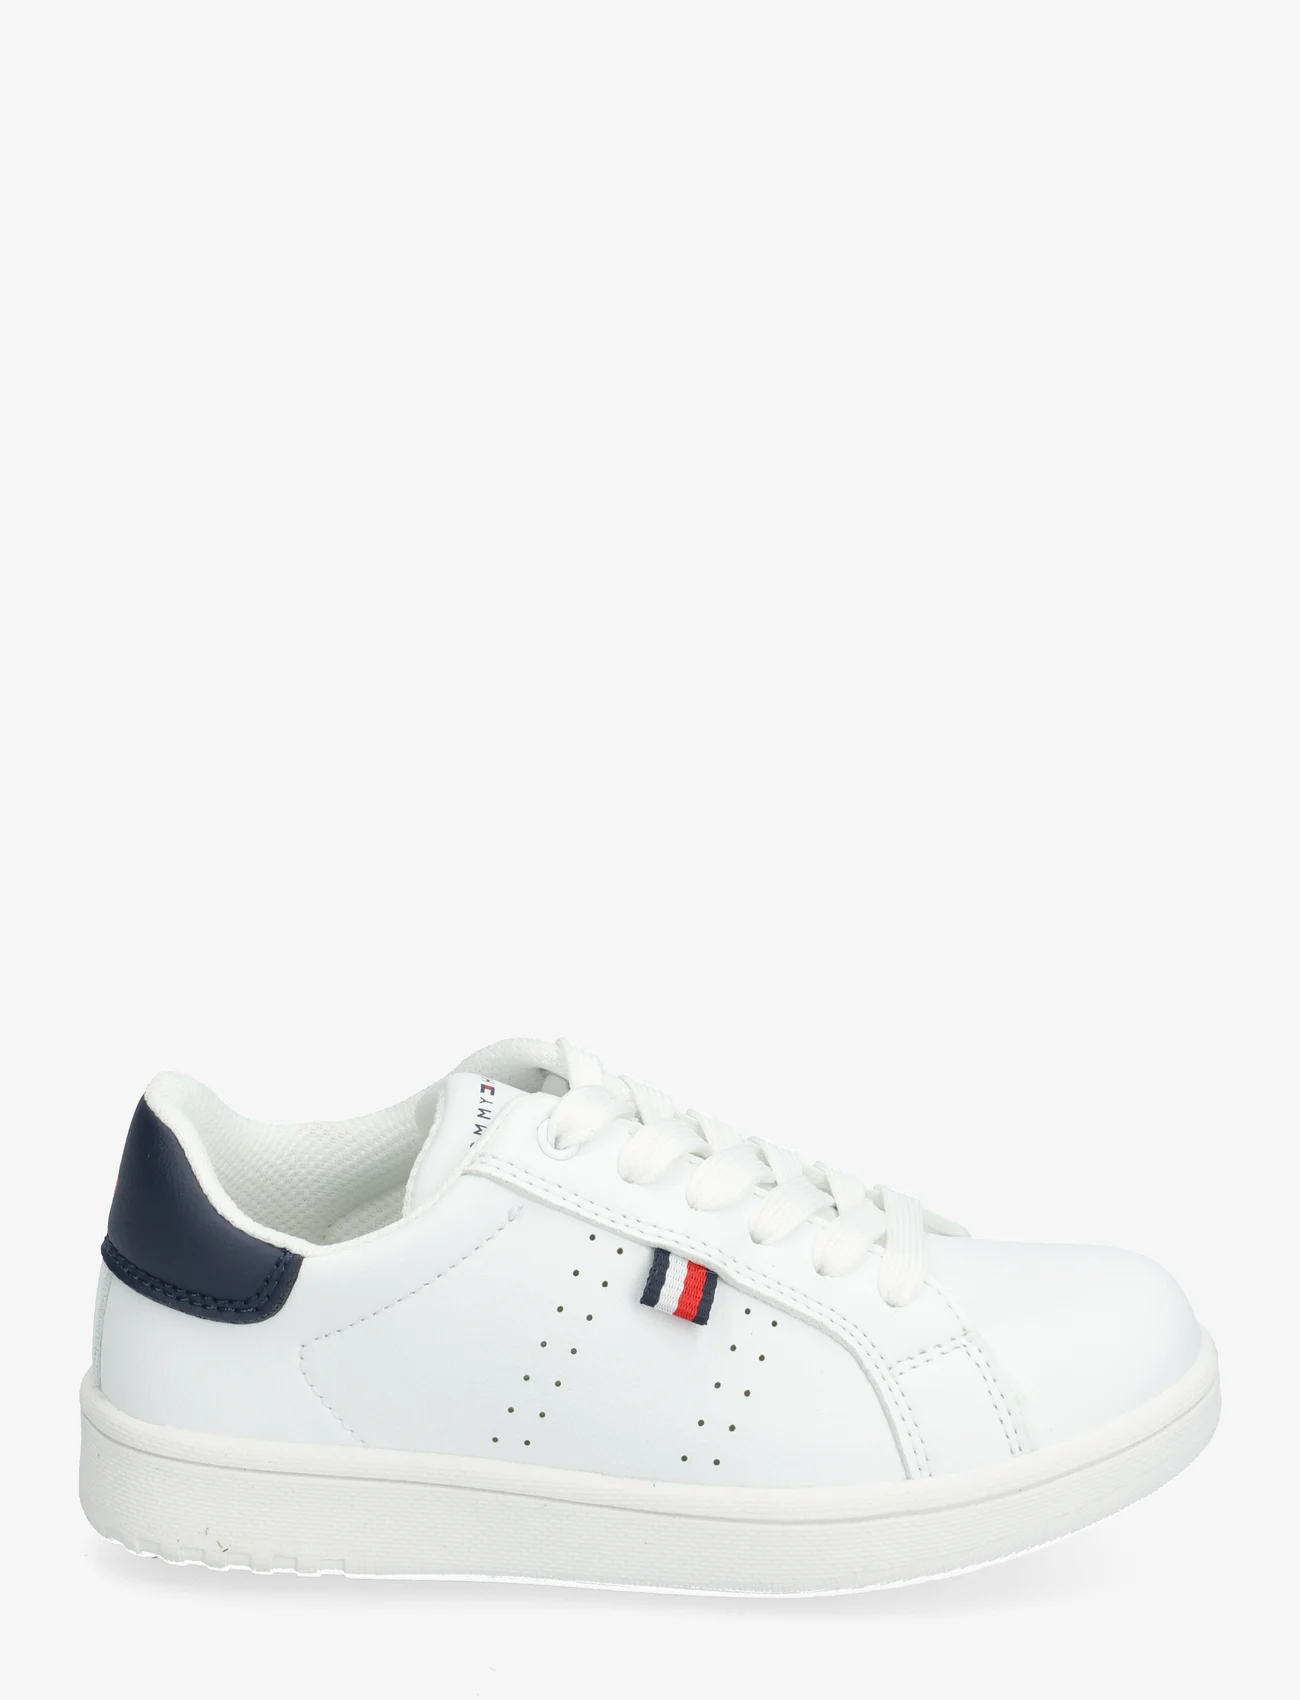 Tommy Hilfiger - LOW CUT LACE-UP SNEAKER - summer savings - white - 1